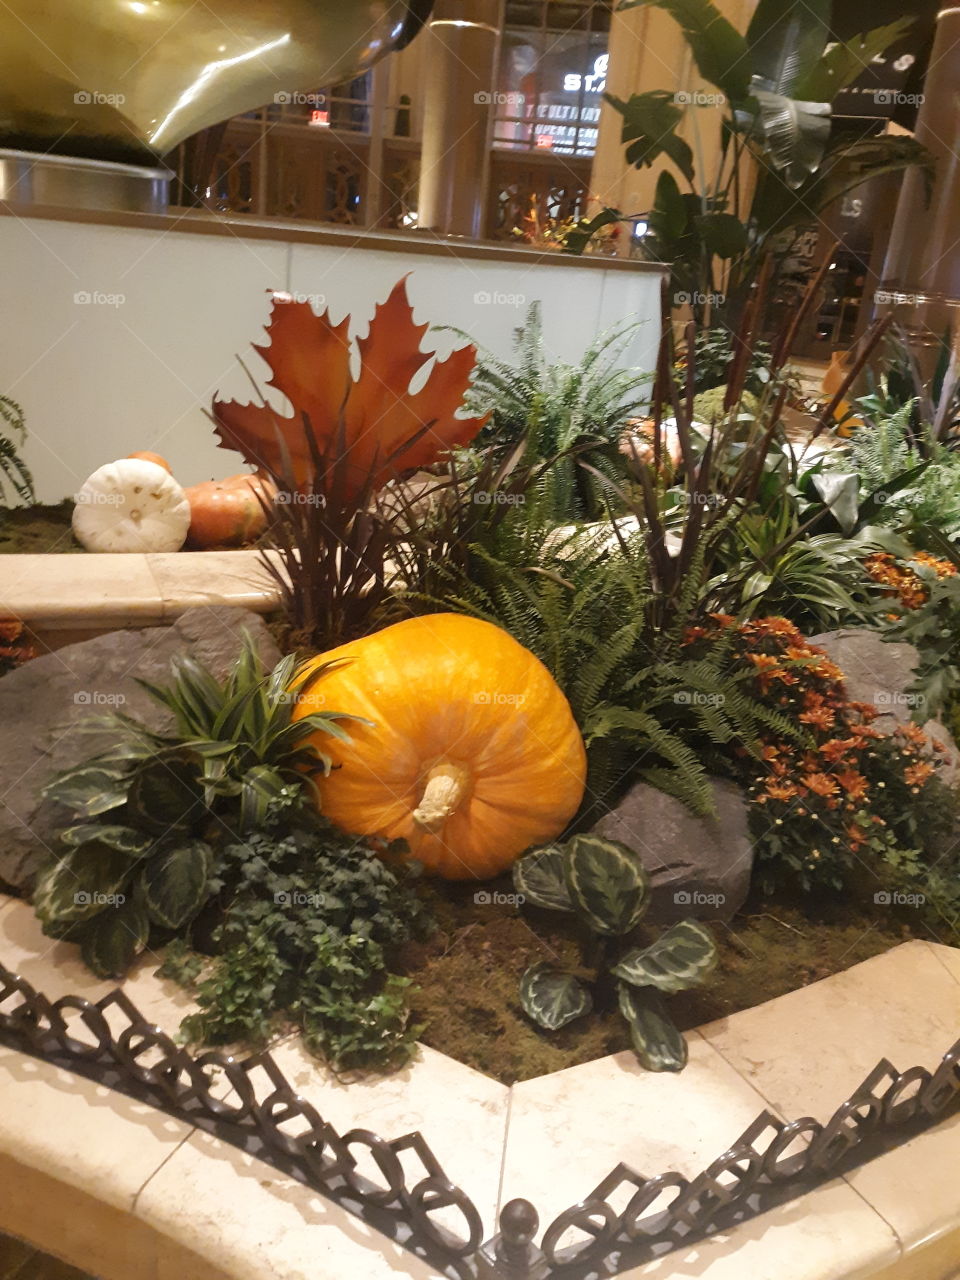 Beautiful pumpkins and beautiful autumn leaves on display at the Palazzo hotel in Las Vegas NV